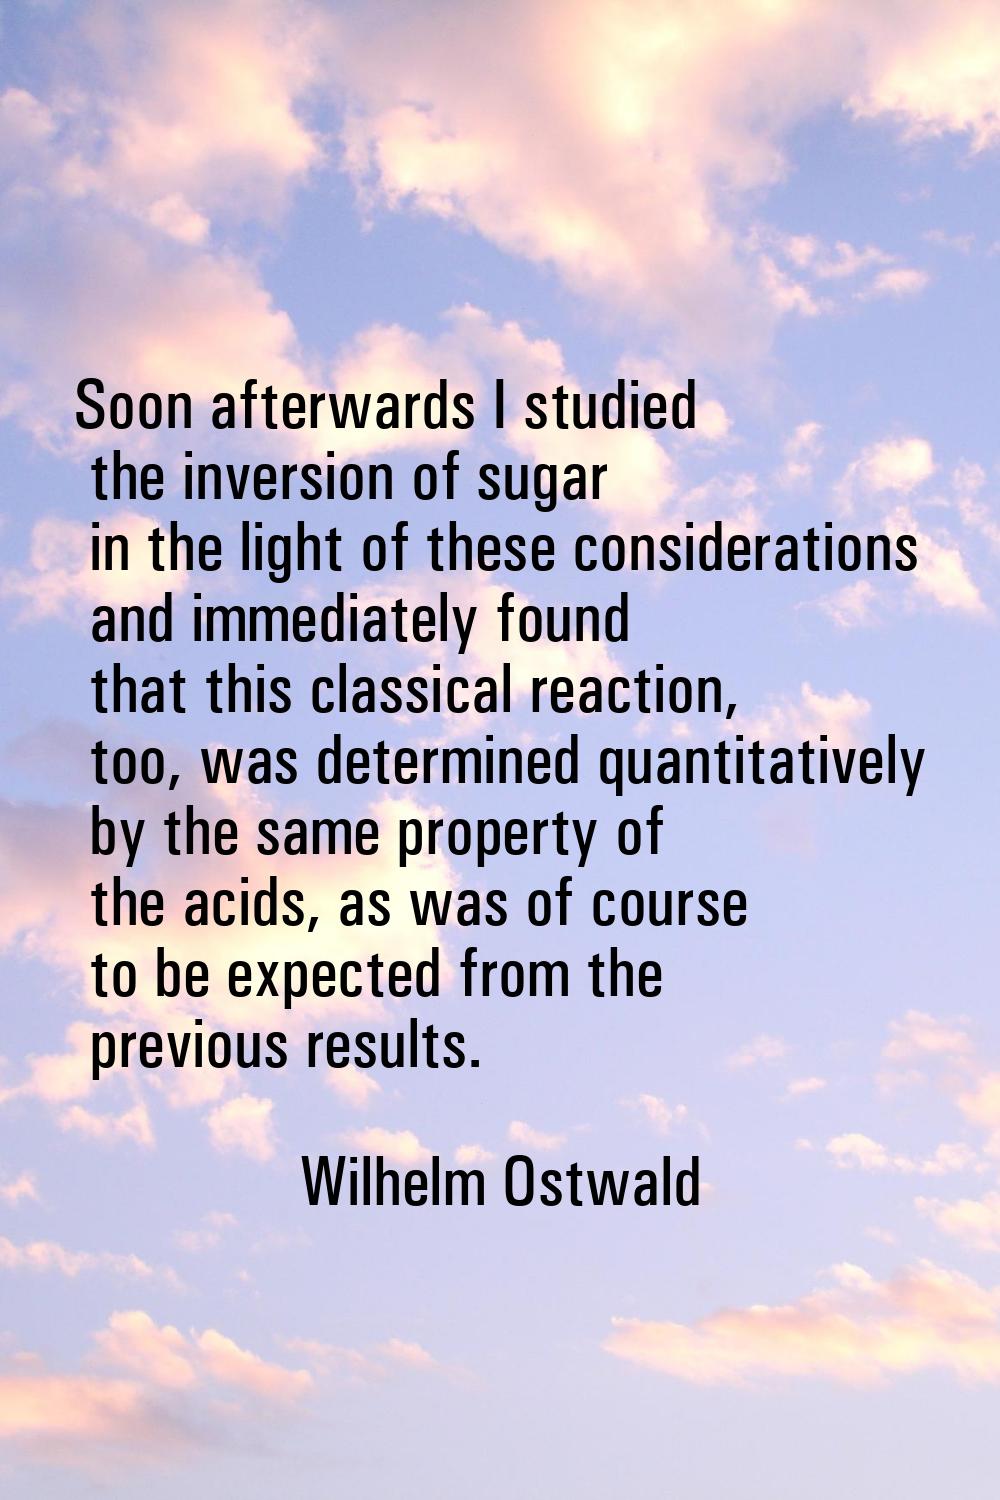 Soon afterwards I studied the inversion of sugar in the light of these considerations and immediate